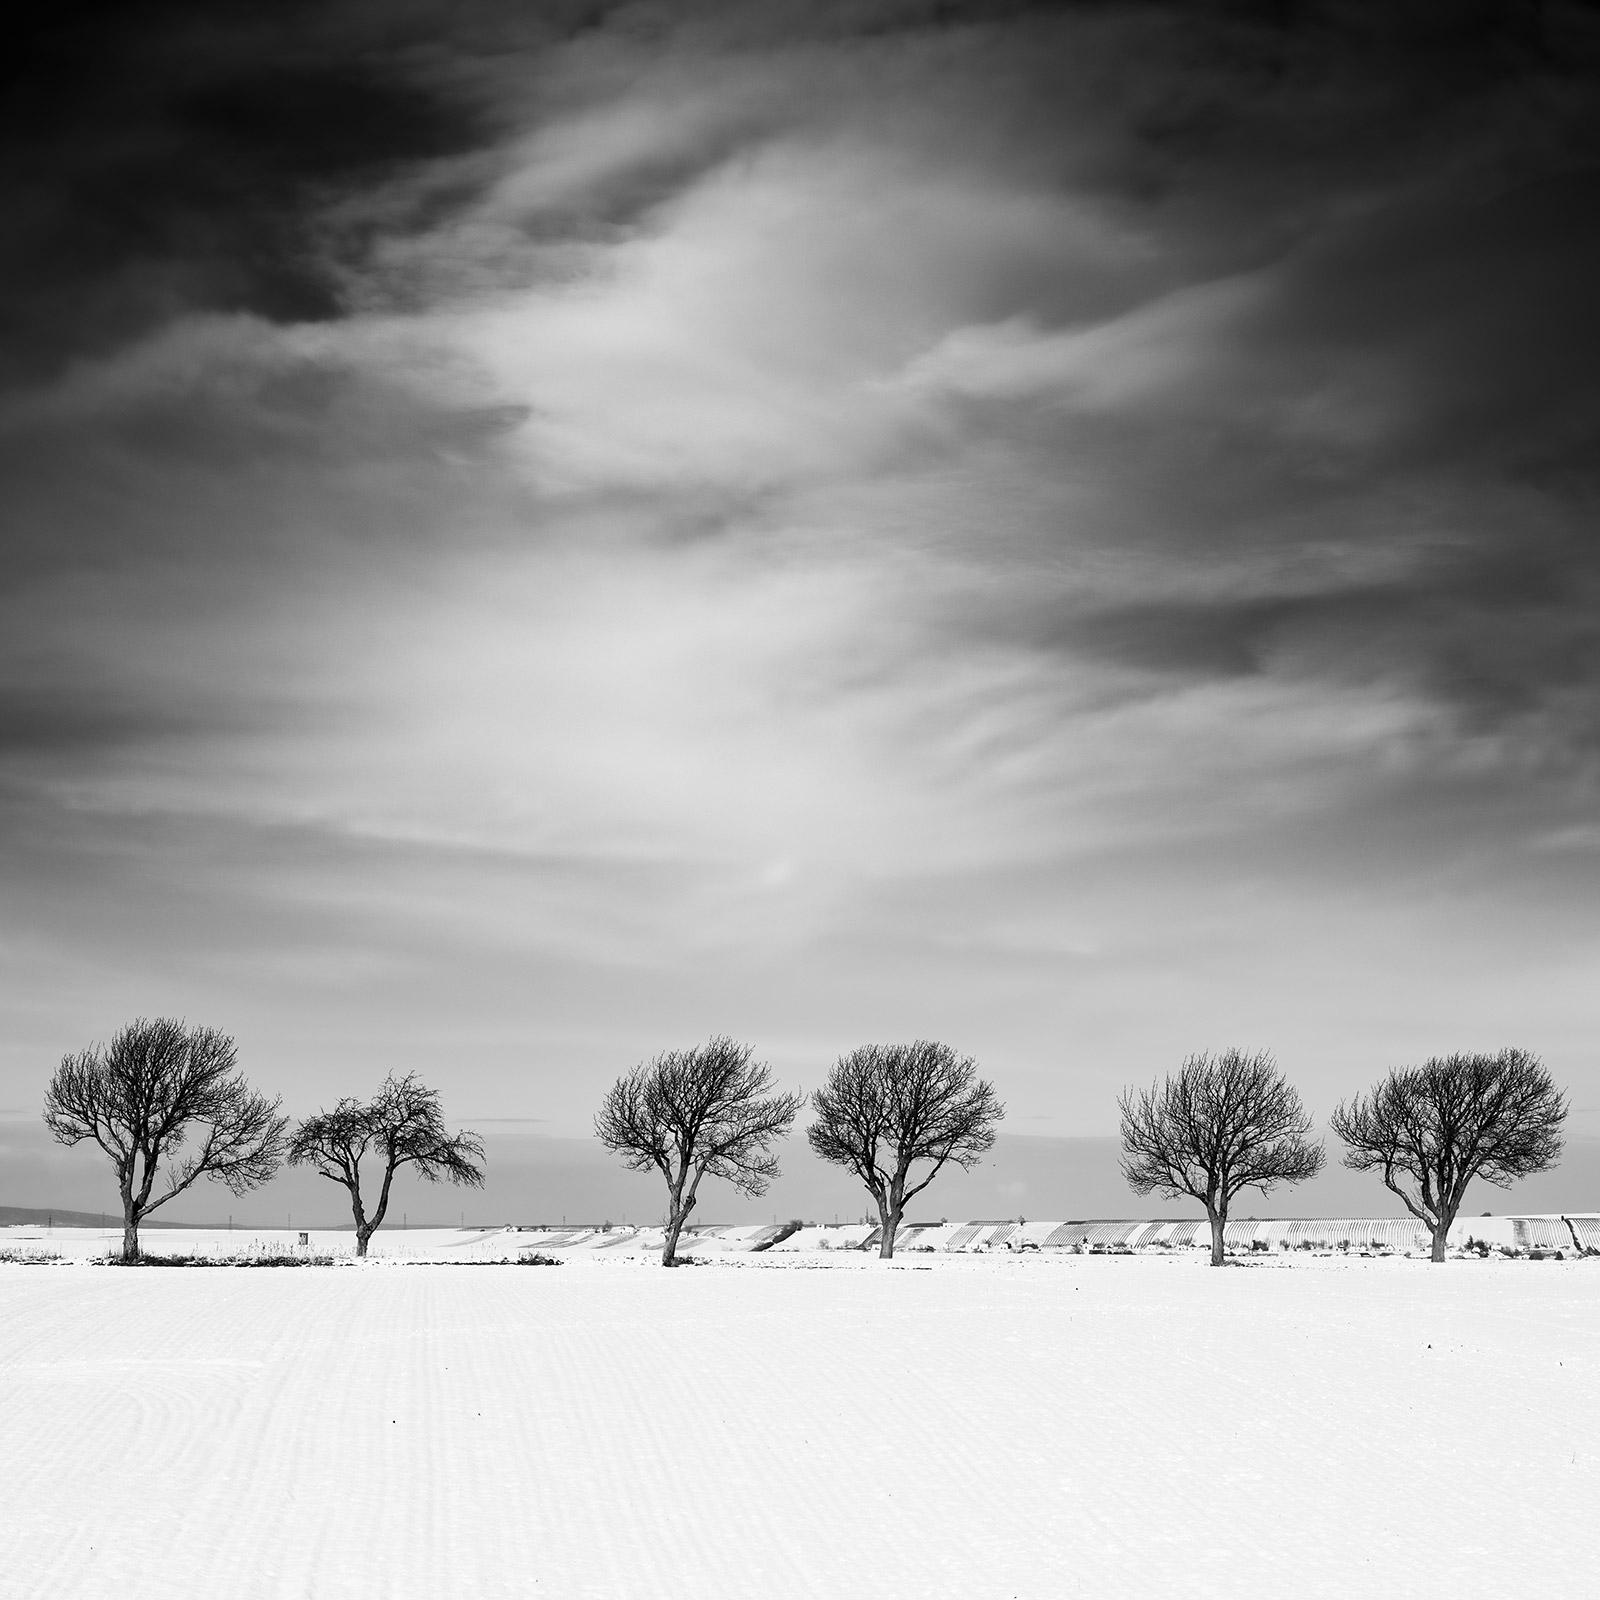 Cherry Tree Avenue, Winter, snowy Field, black and white landscape photography